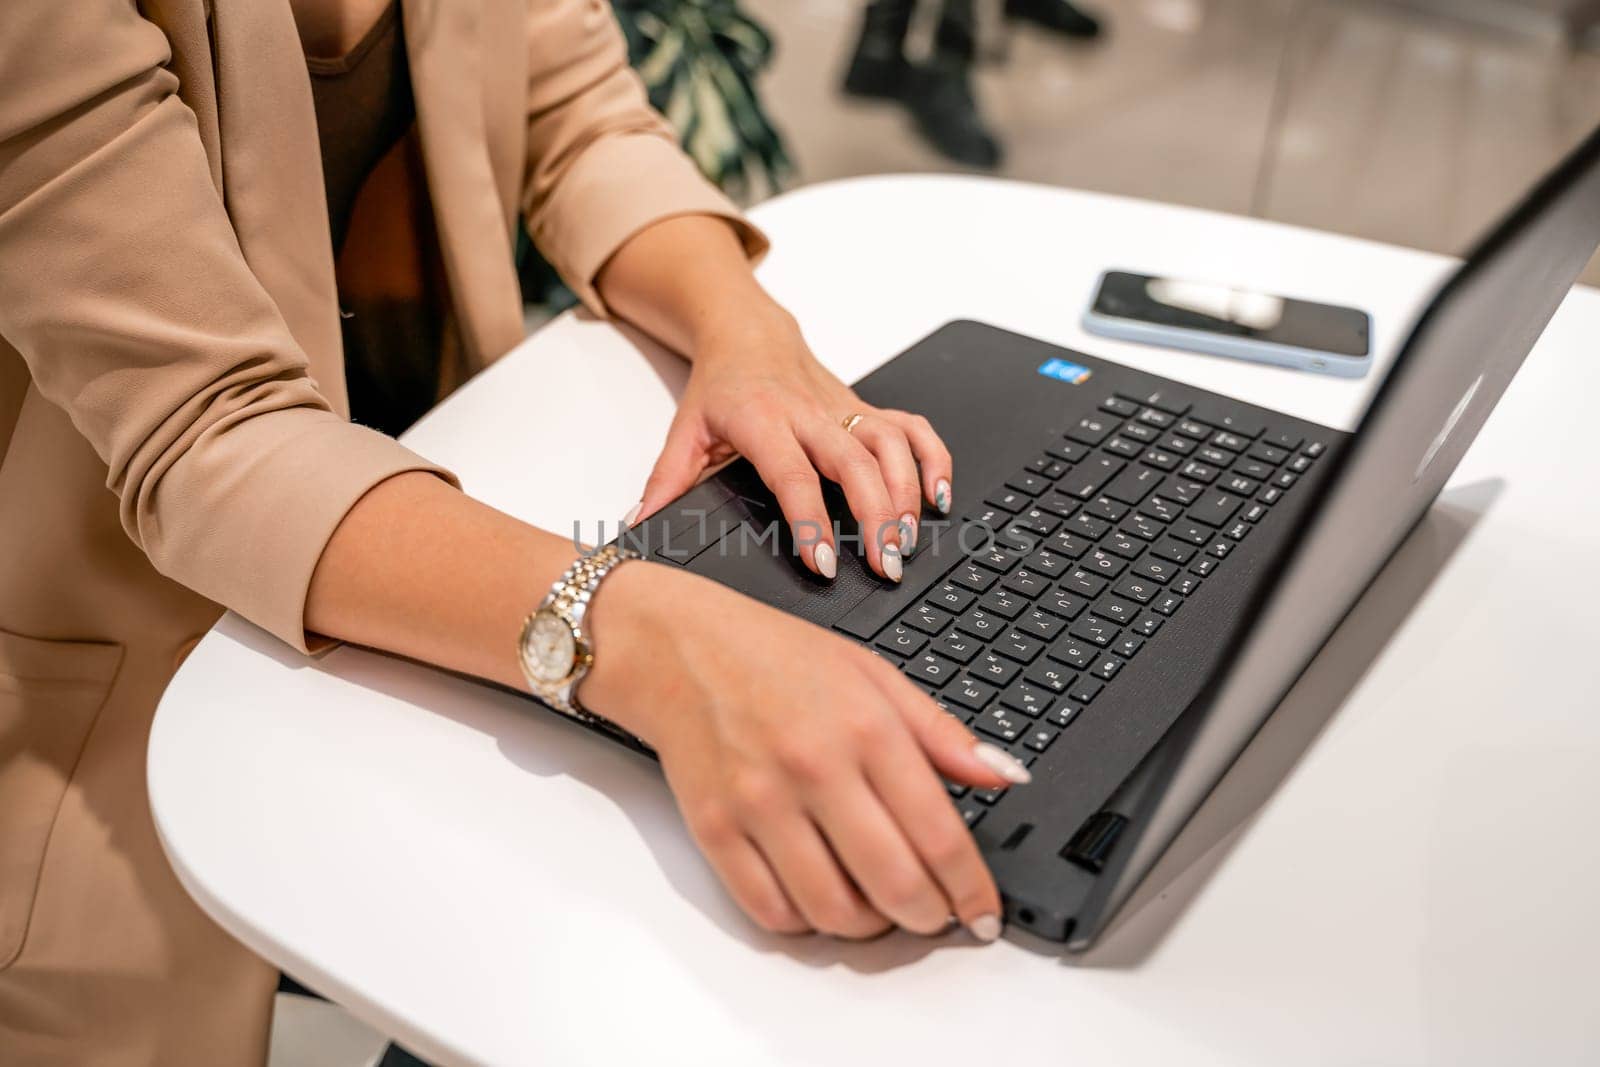 A business woman sits in a cafe and works at a computer. She is wearing a beige jacket